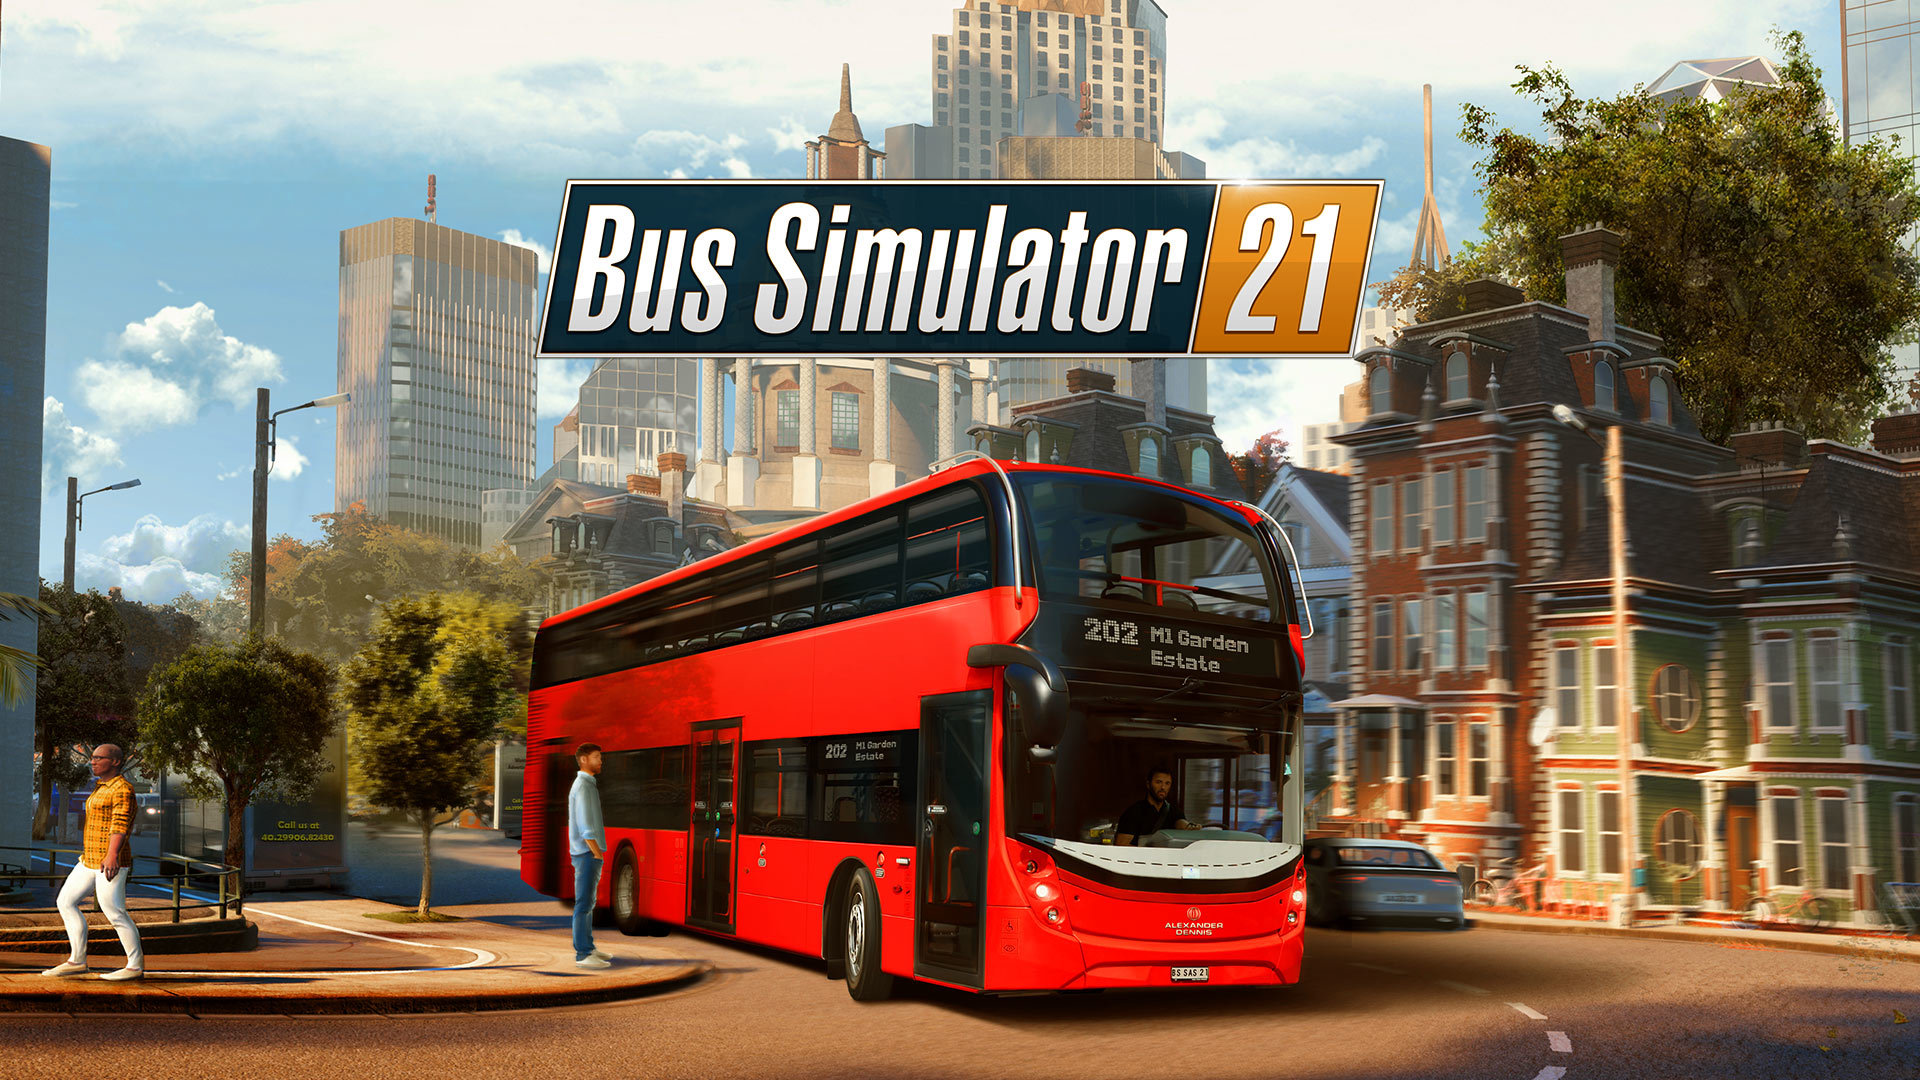 for ios download Bus Simulation Ultimate Bus Parking 2023